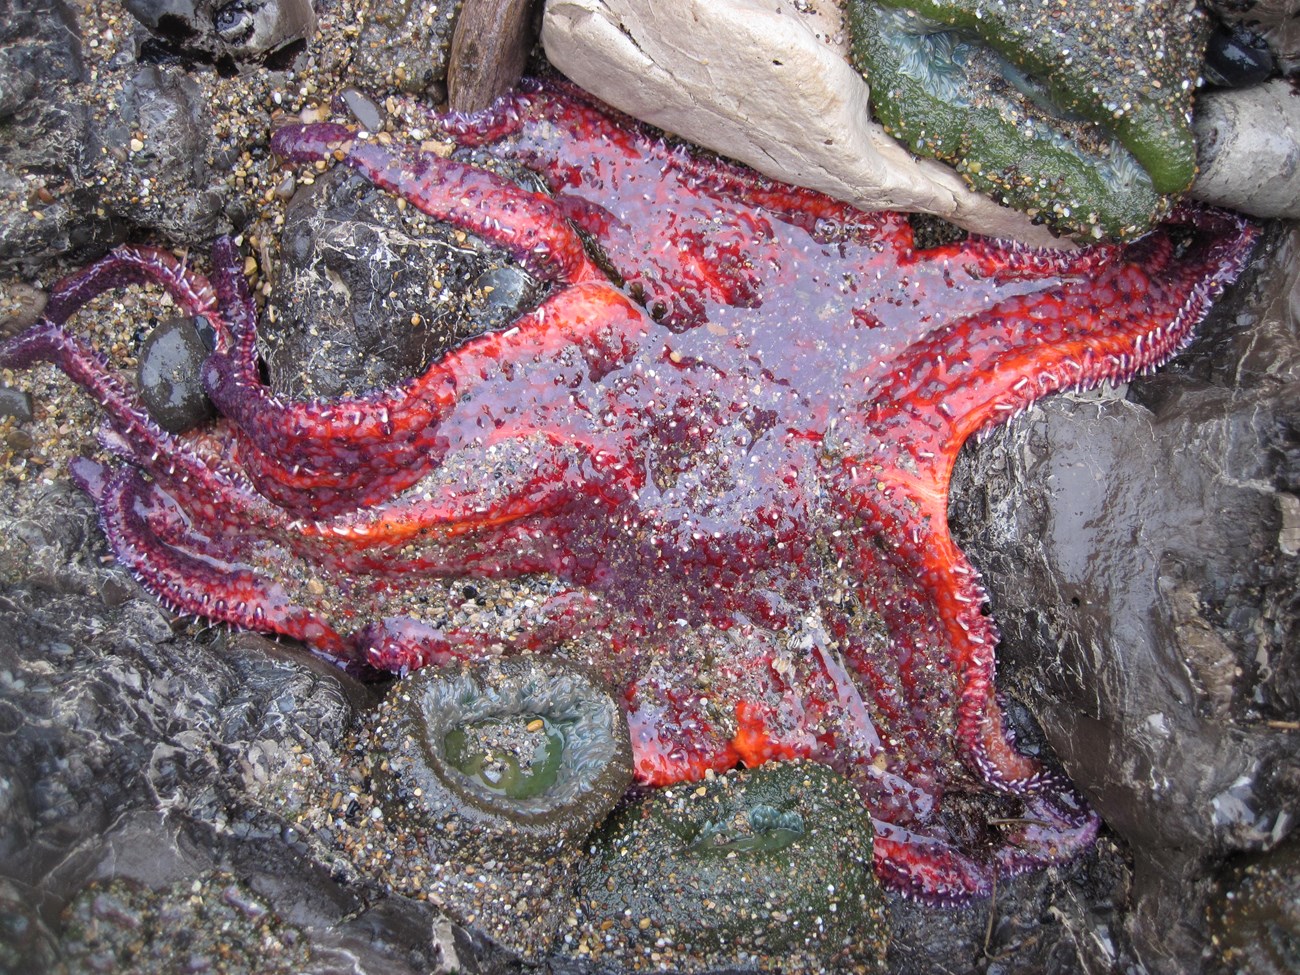 A large, red-colored sunflower sea star that appears to be melting or dissolving.